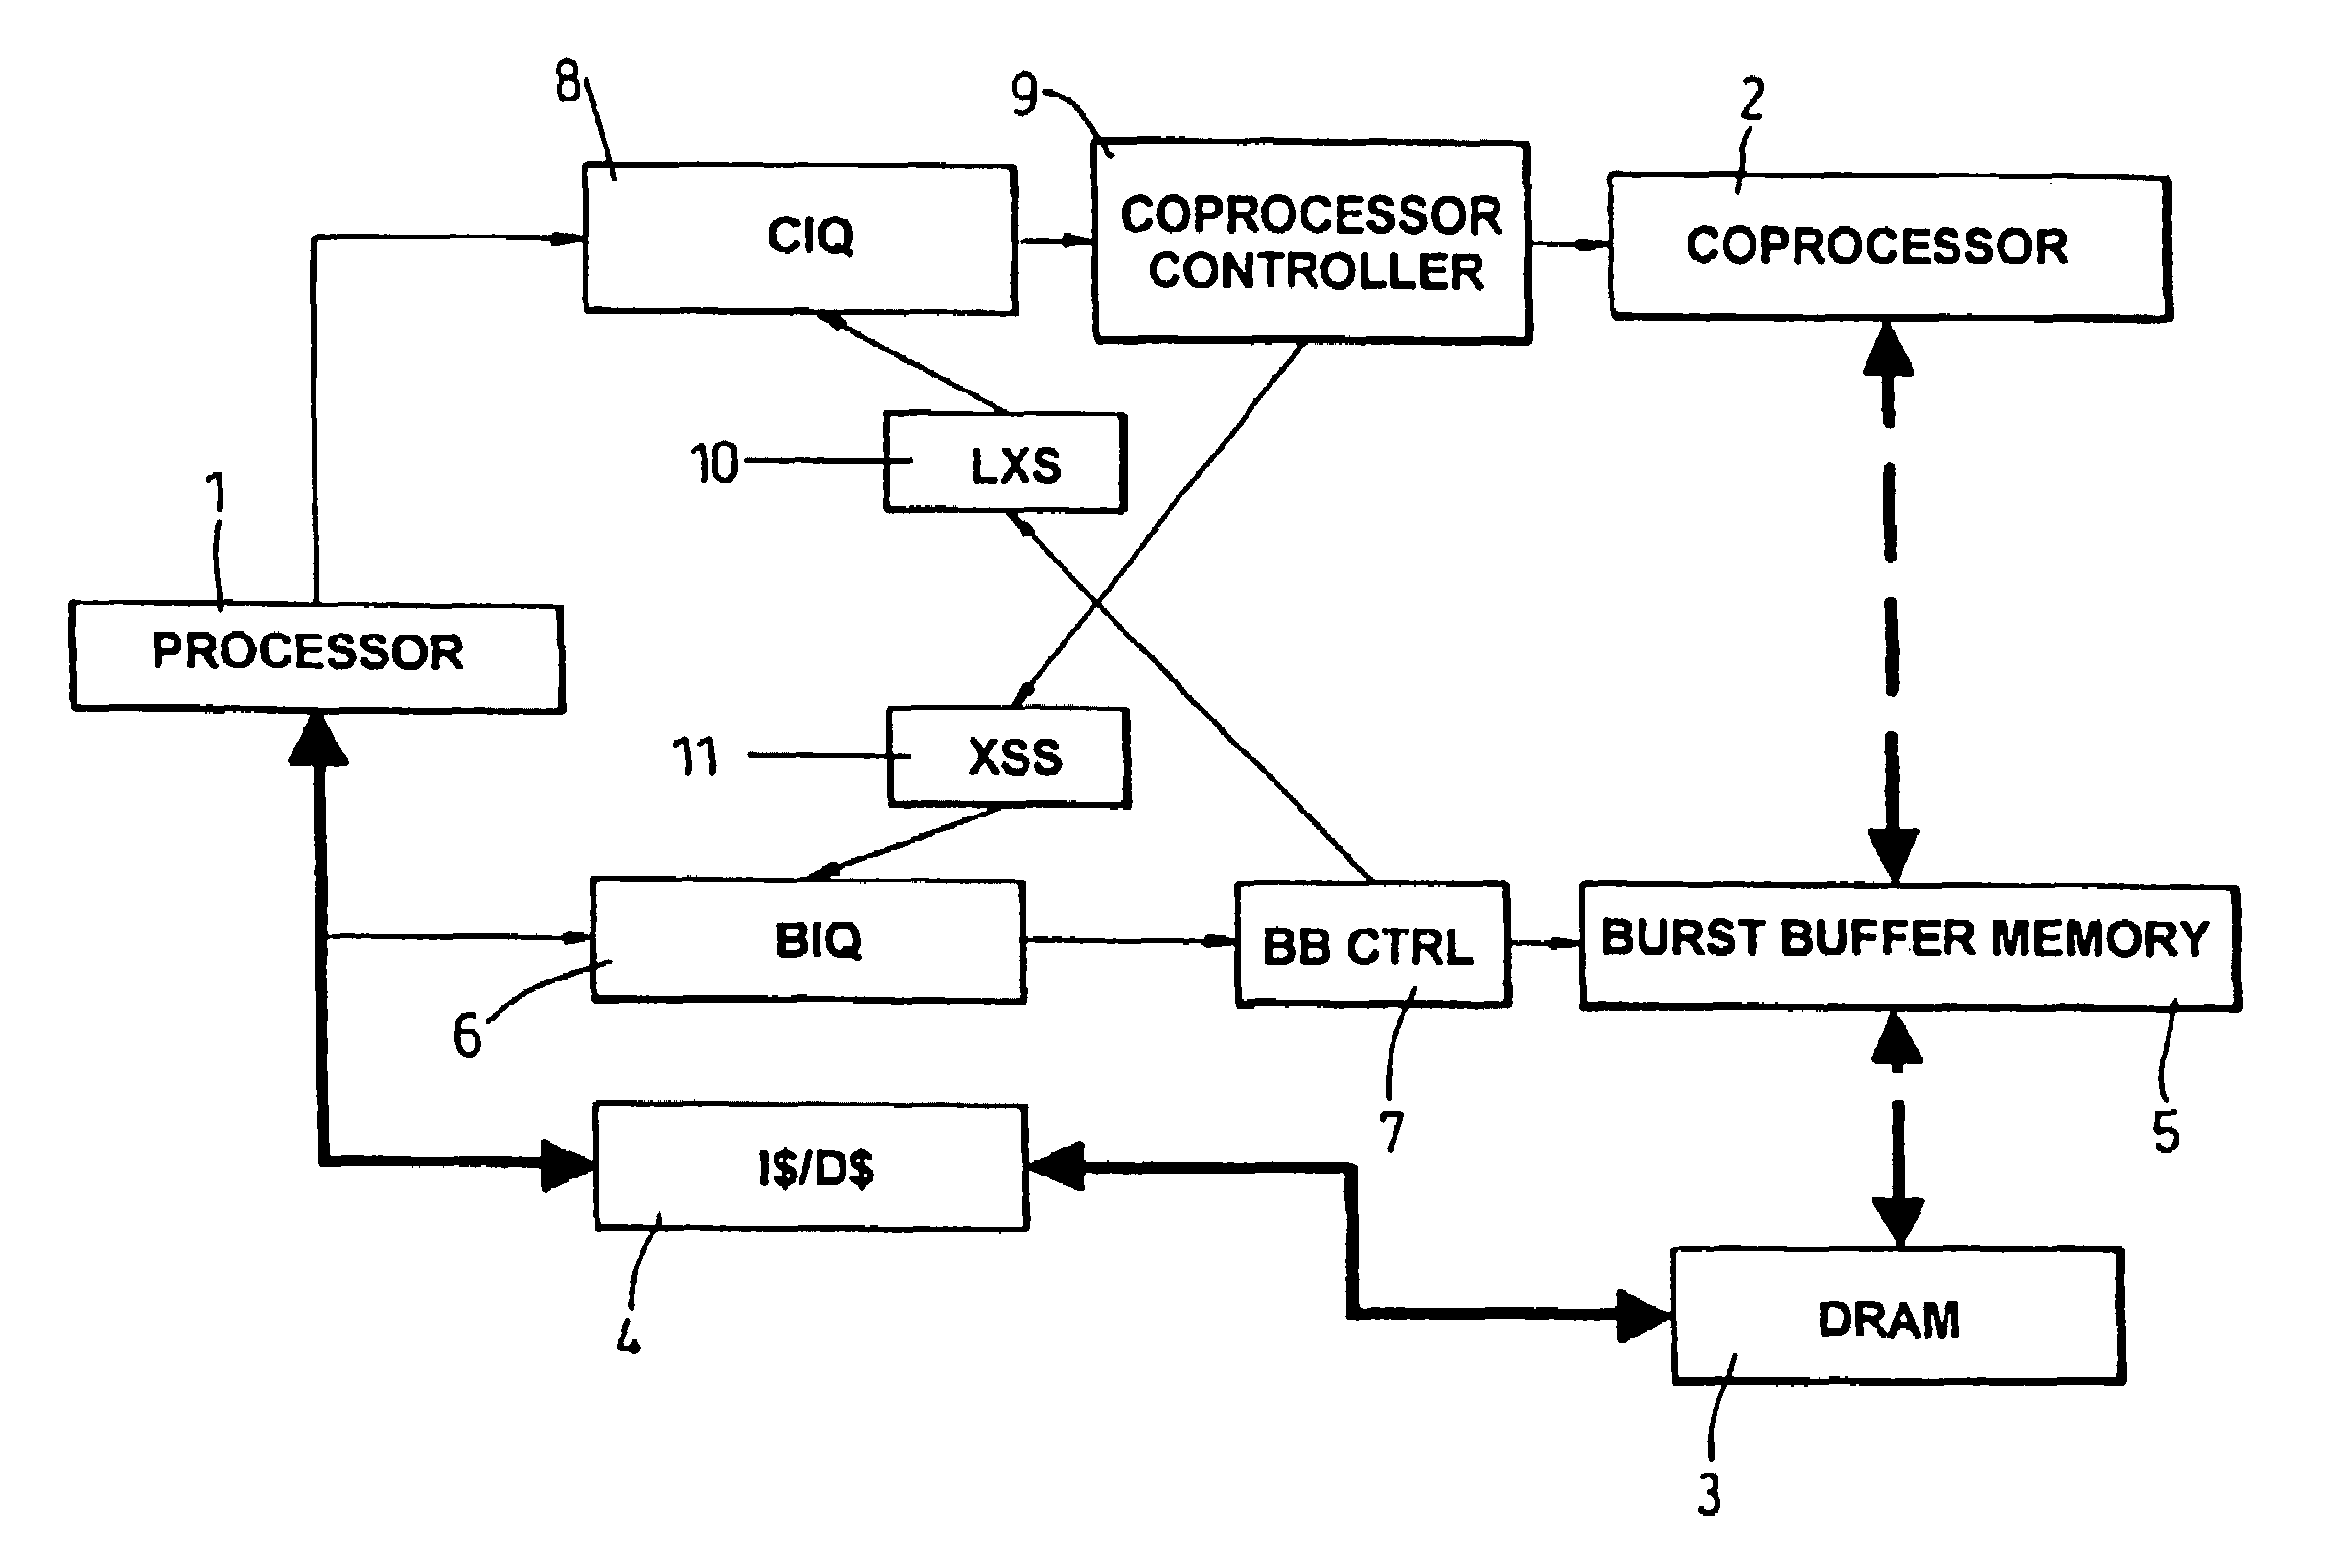 Computer architecture containing processor and decoupled coprocessor